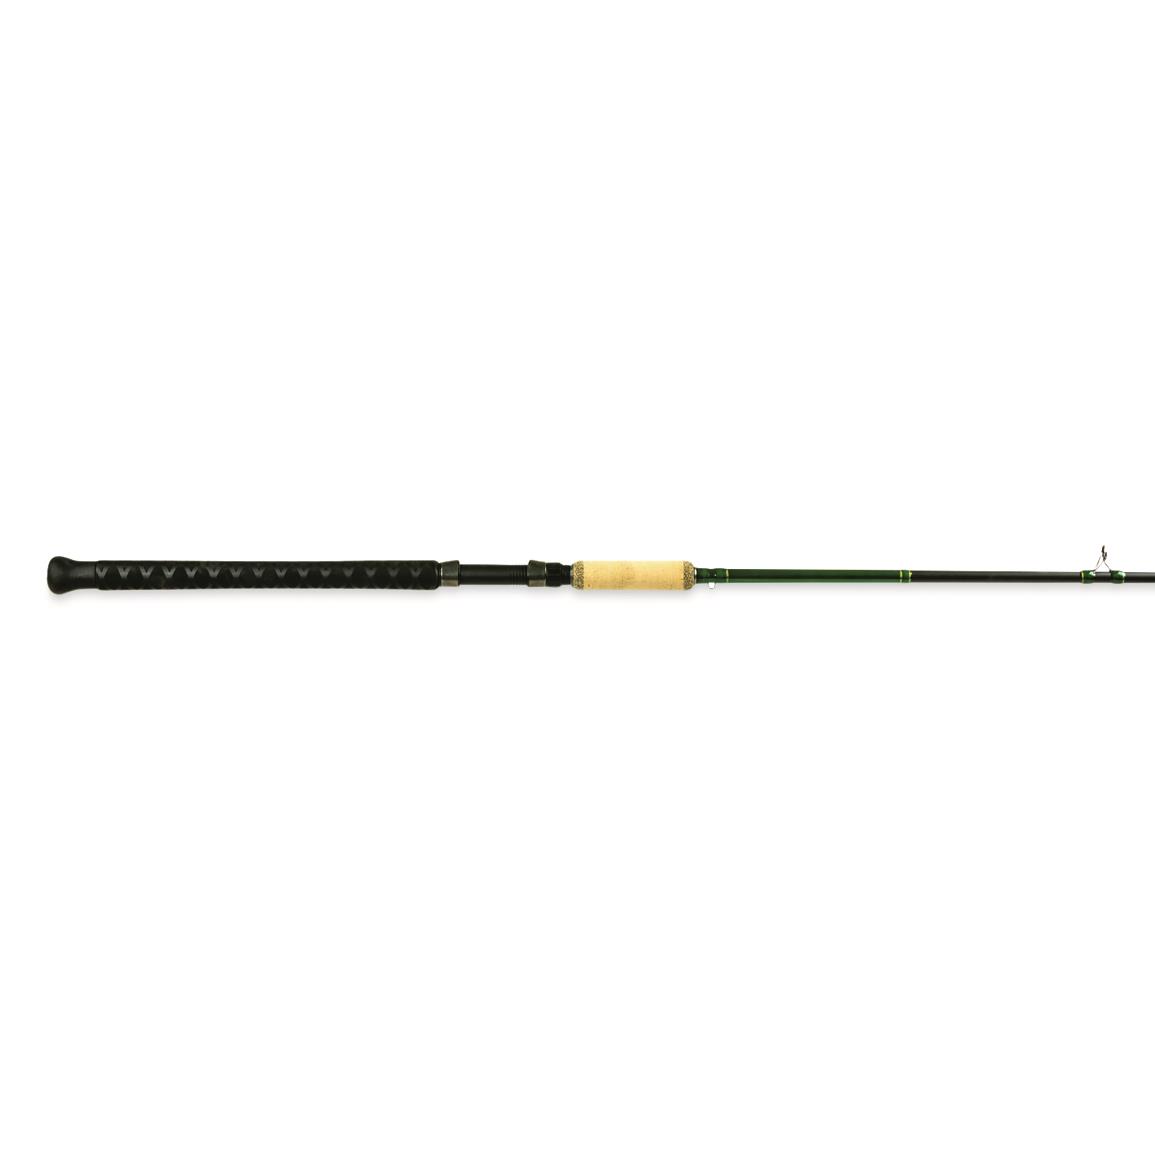 Shimano Compre Muskie Casting Rod, 8' Length, Extra Heavy Power, Fast Action